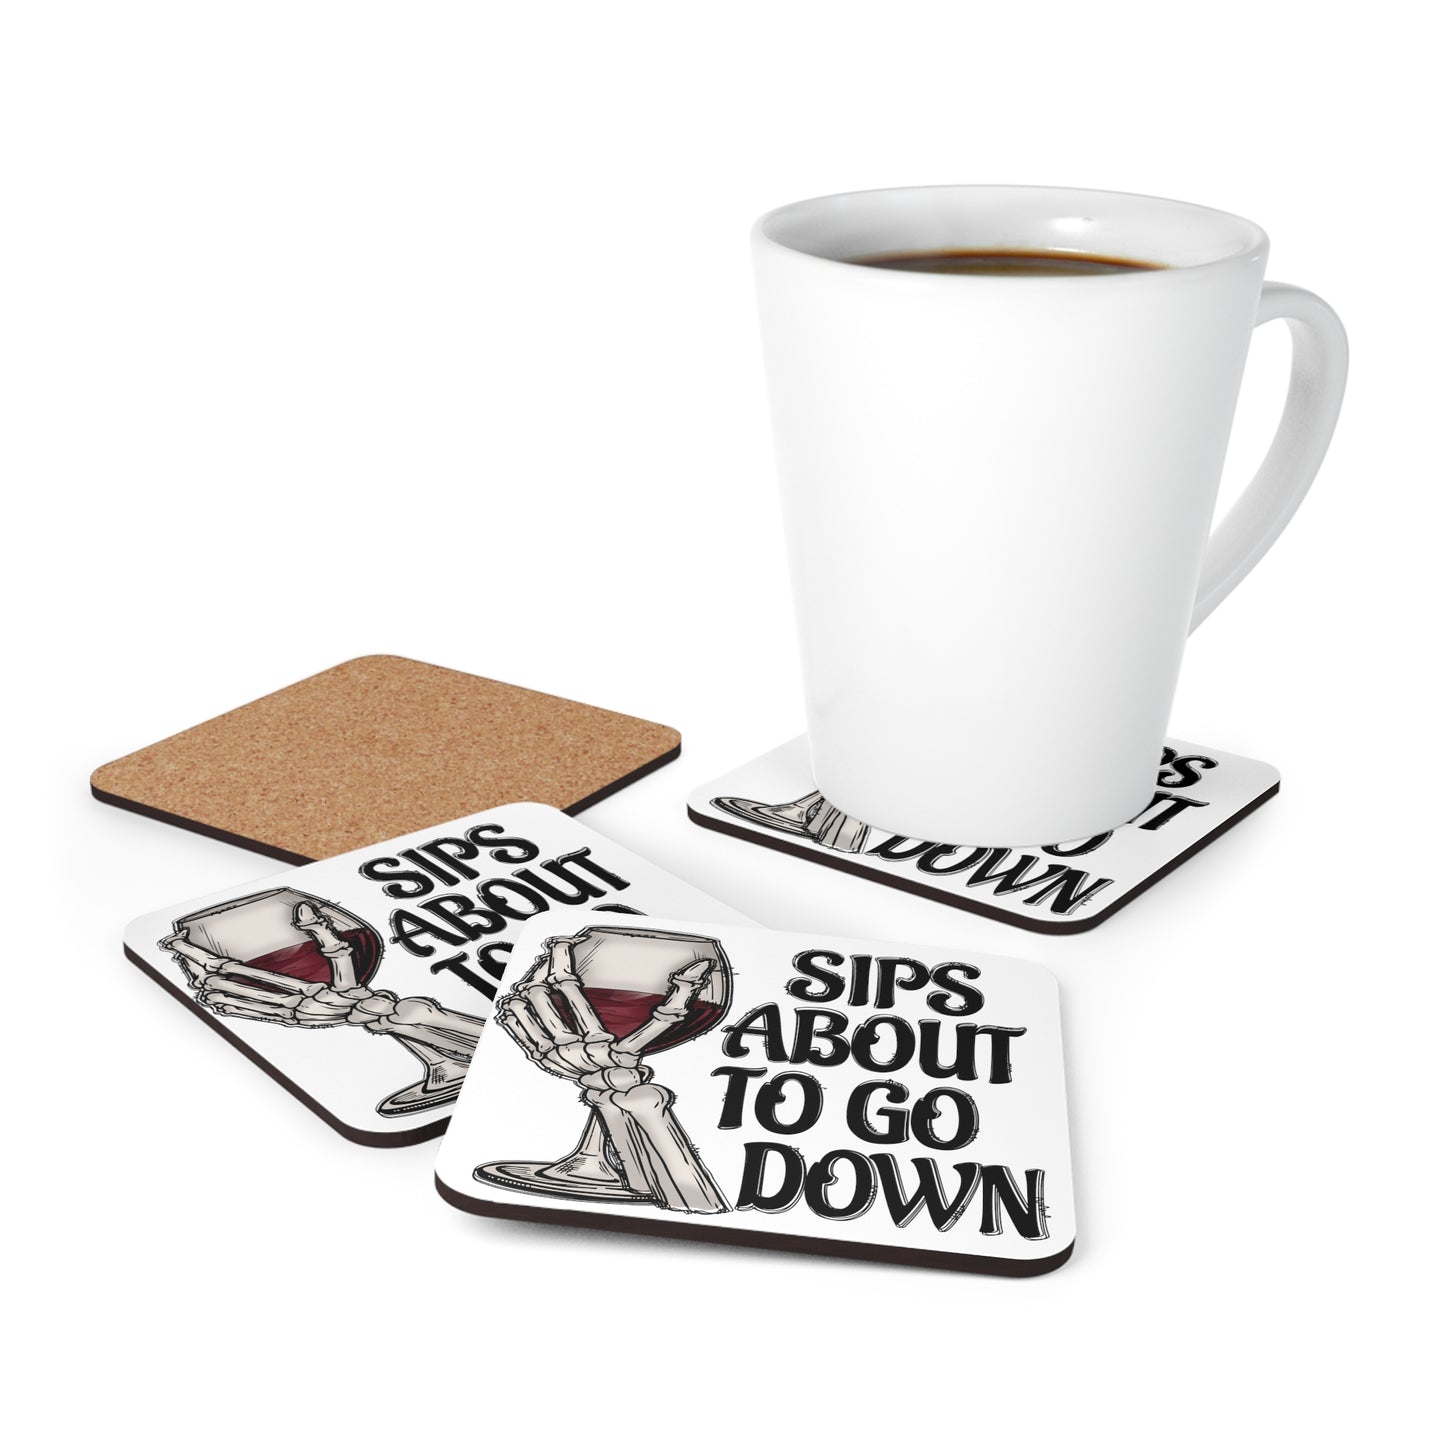 Sips about to Down - Corkwood Coaster Set